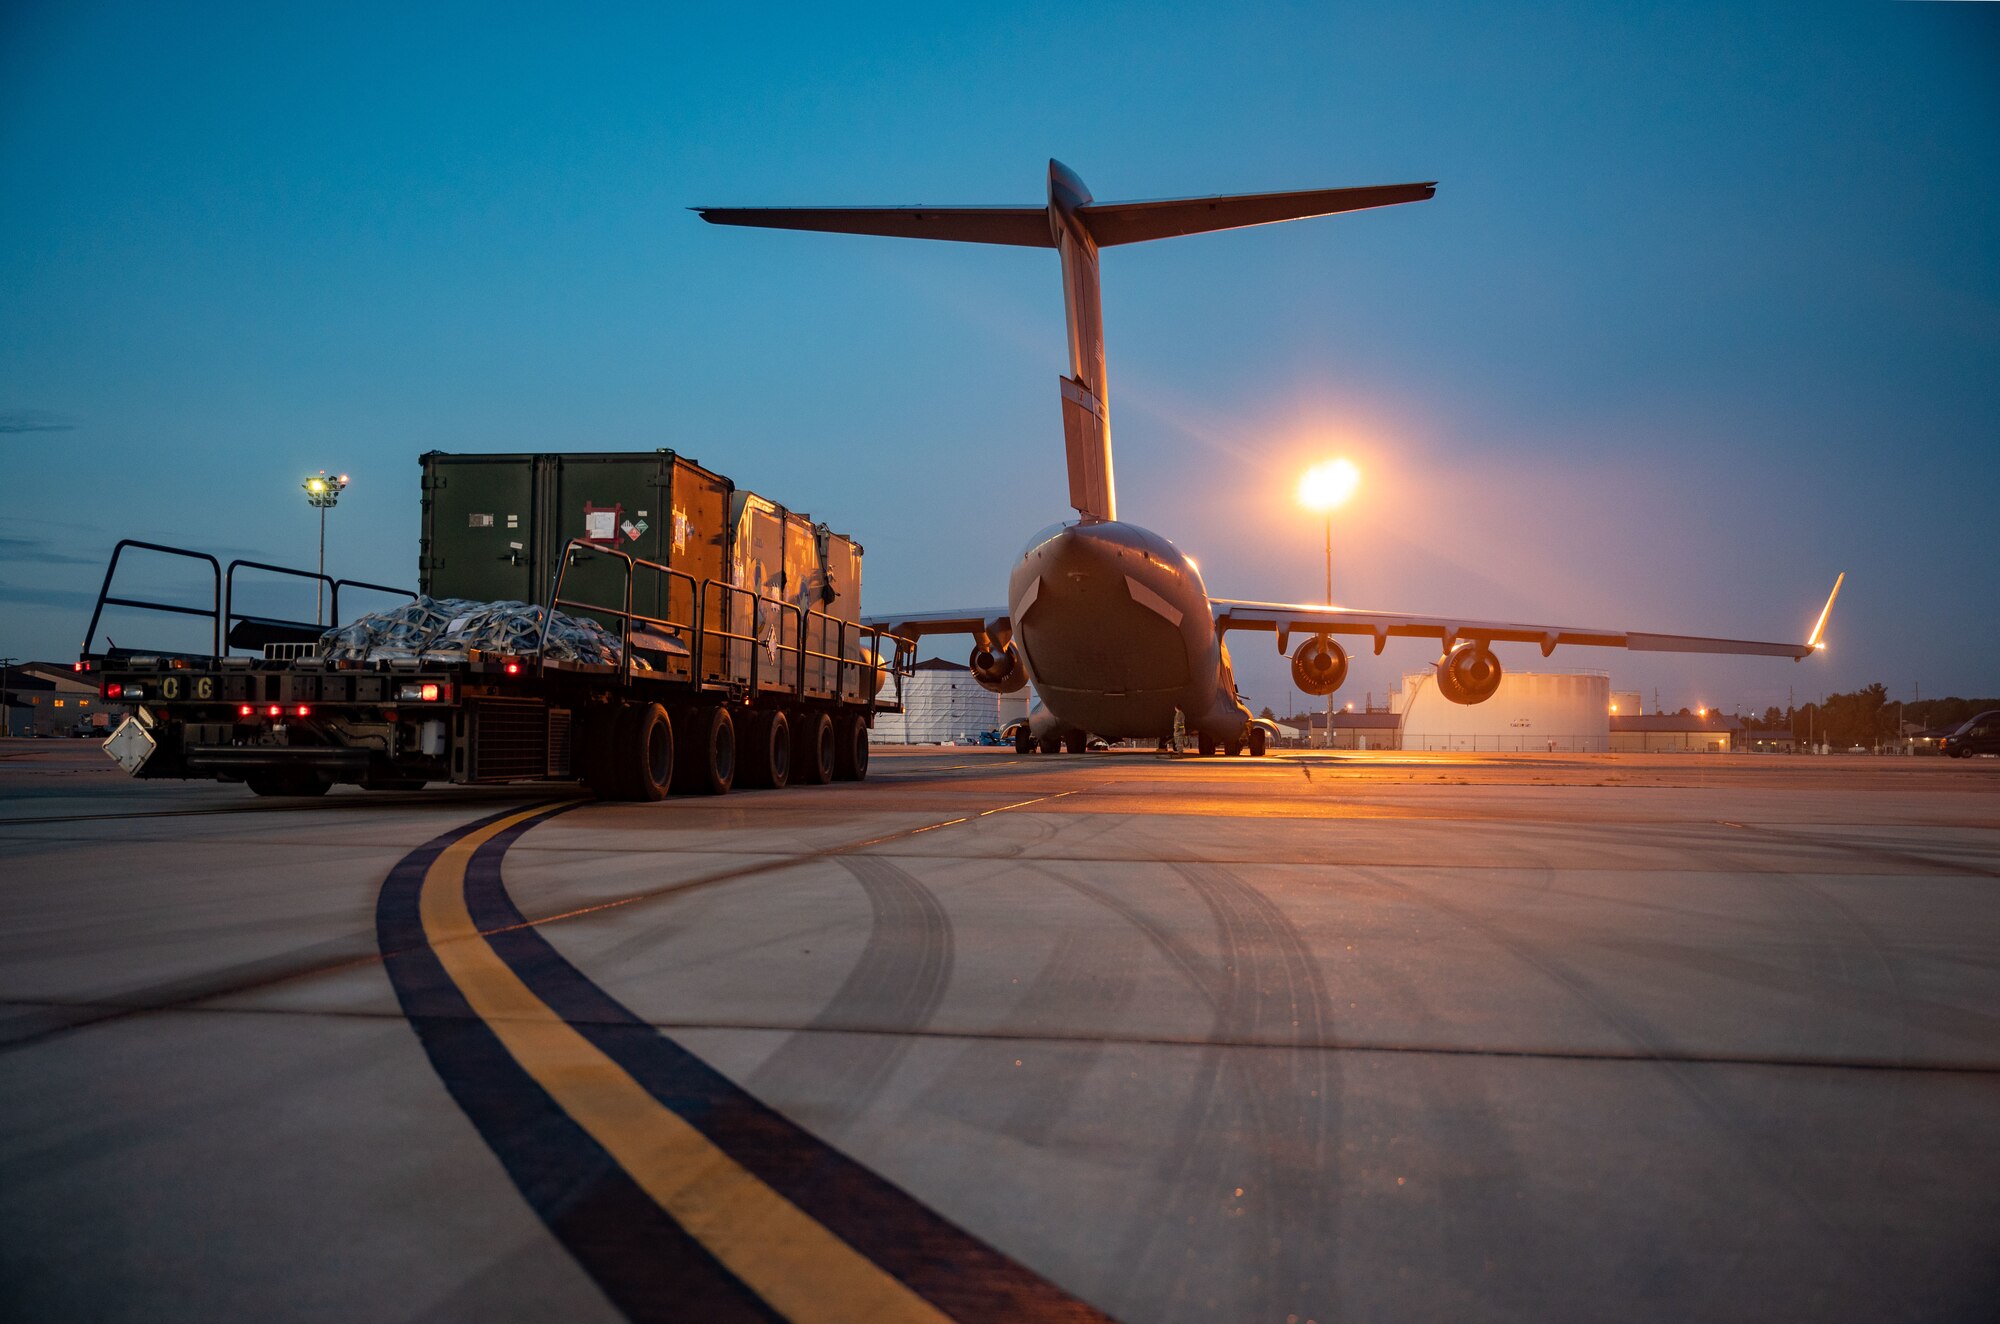 A K-loader prepares to load cargo onto a U.S. Air Force C-17 Globemaster III at Dover Air Force Base, Delaware, prior to the Agile Royal C-17 Air Force Force Generation certification event, Sept. 11, 2023. The 436th Aerial Port Squadron evaluated their ability to transition from peacetime readiness to contingency operations during Agile Royal. (U.S. Air Force photo by Airman 1st Class Amanda Jett)